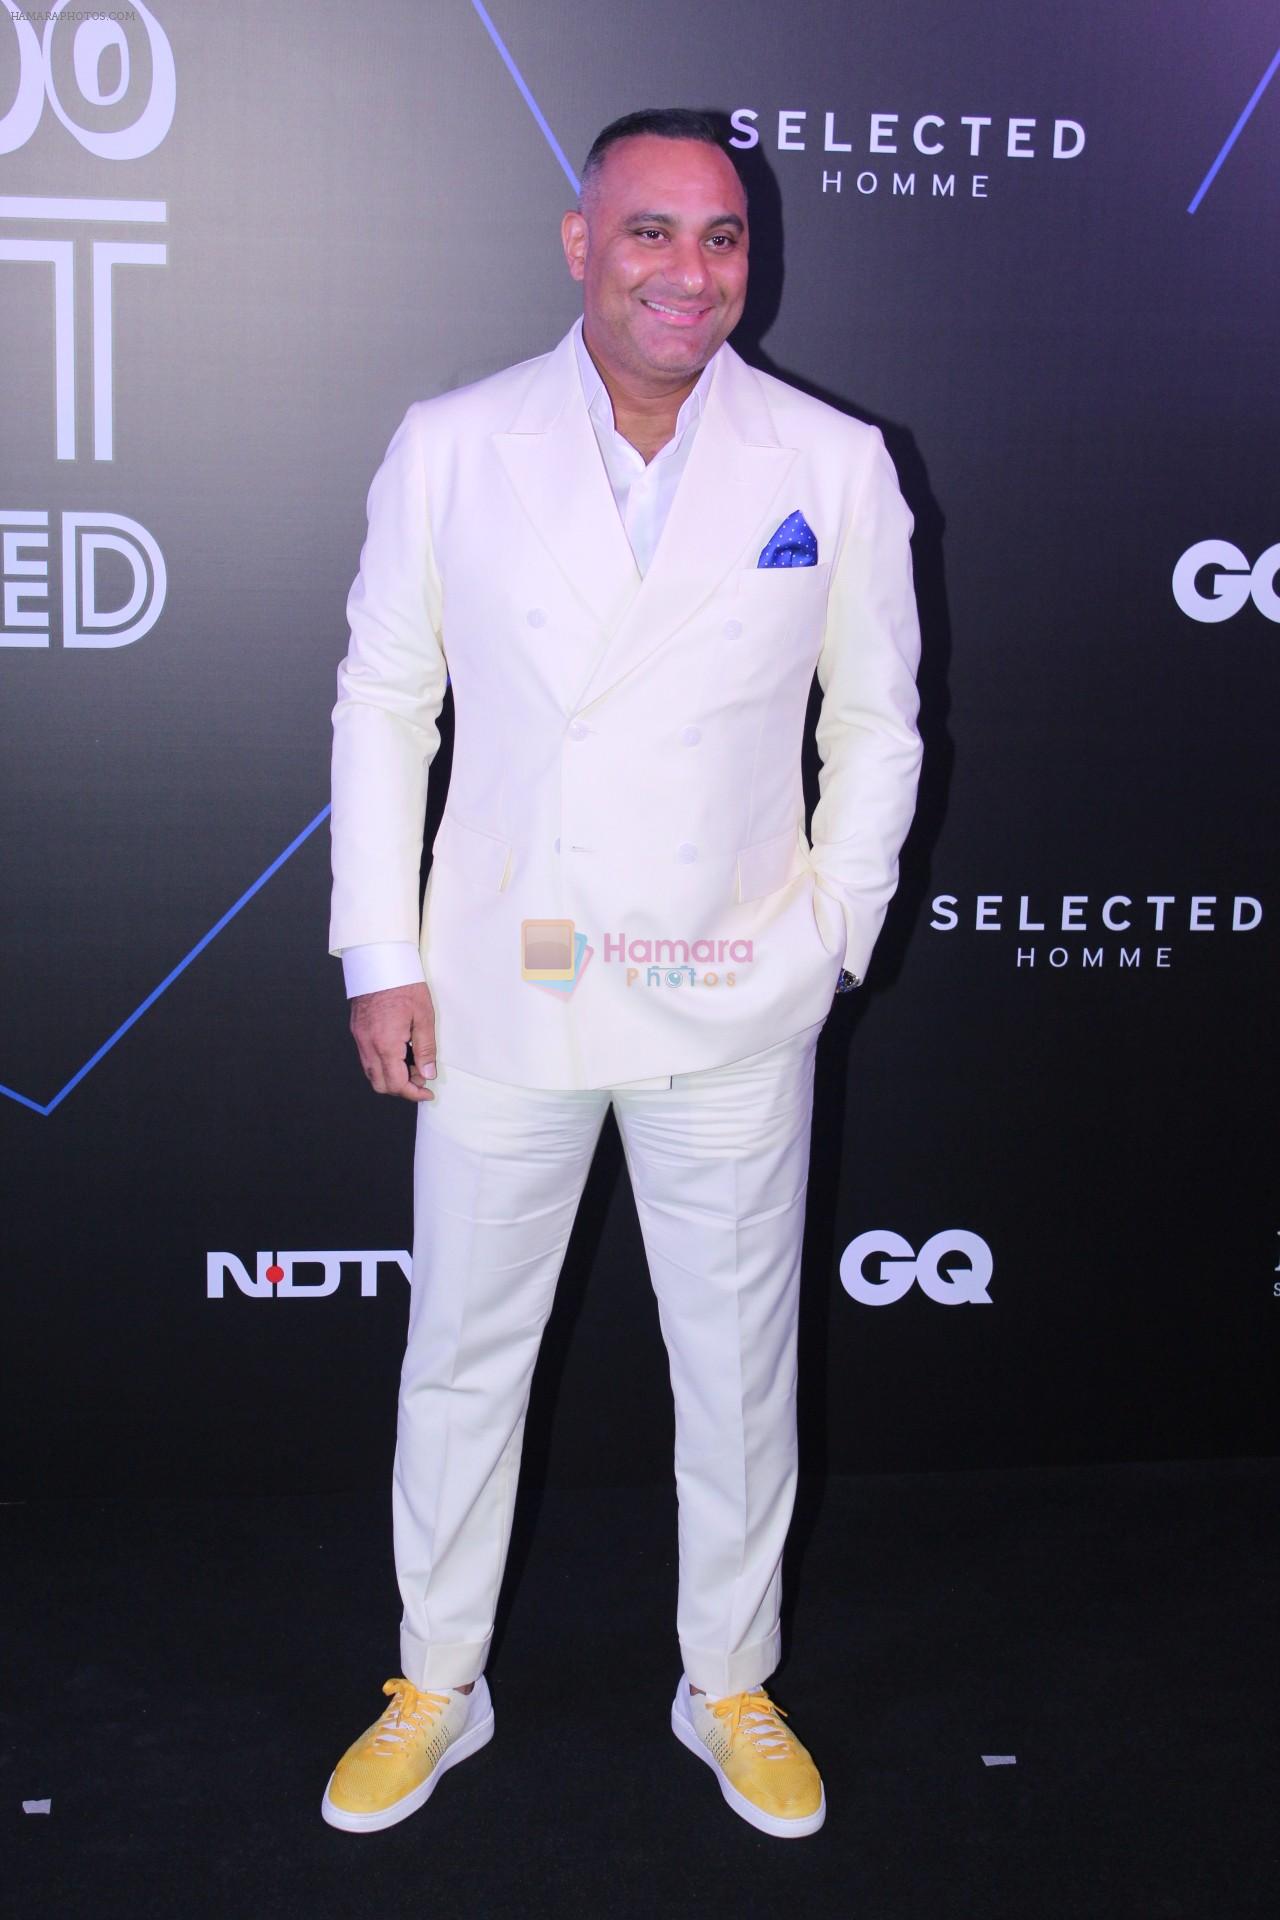 at GQ 100 Best Dressed Awards 2019 on 2nd June 2019